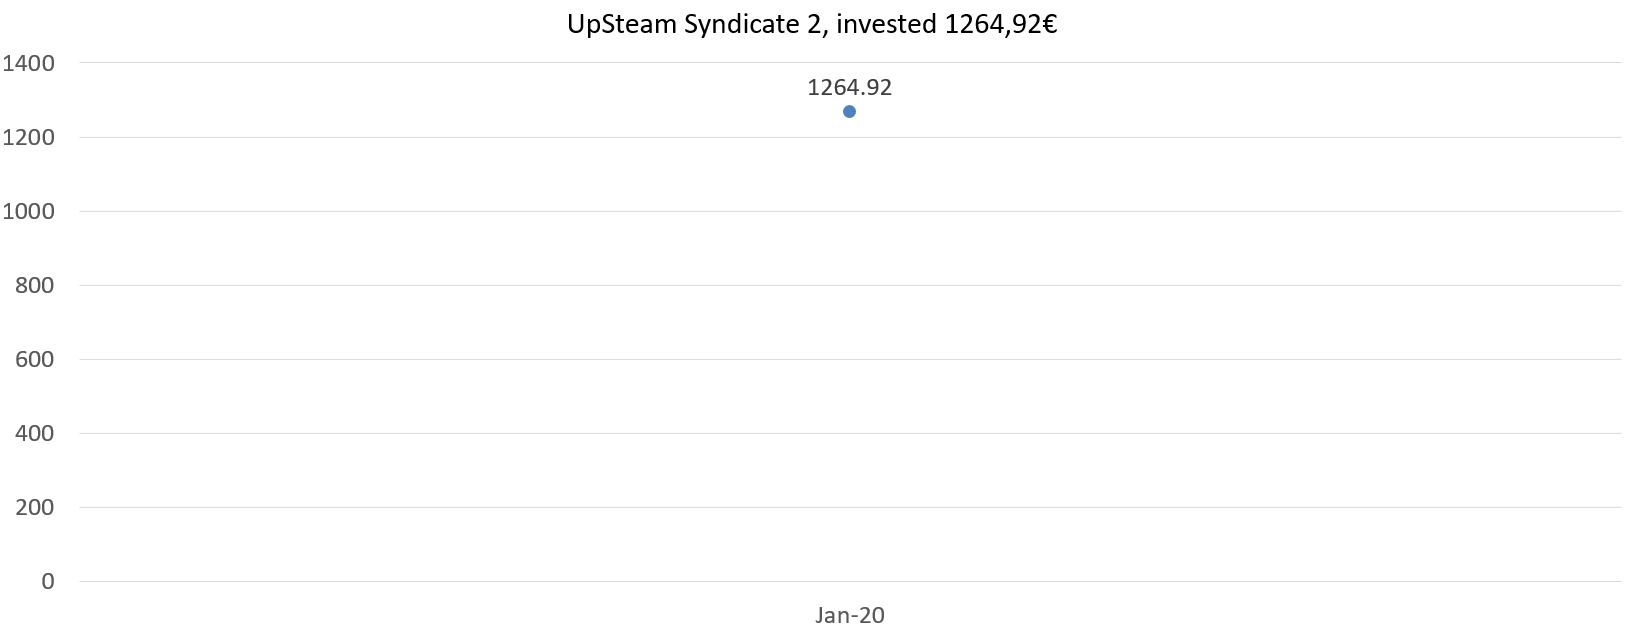 UpSteam Syndicate 2, invested 1264,92 euros, january 2020